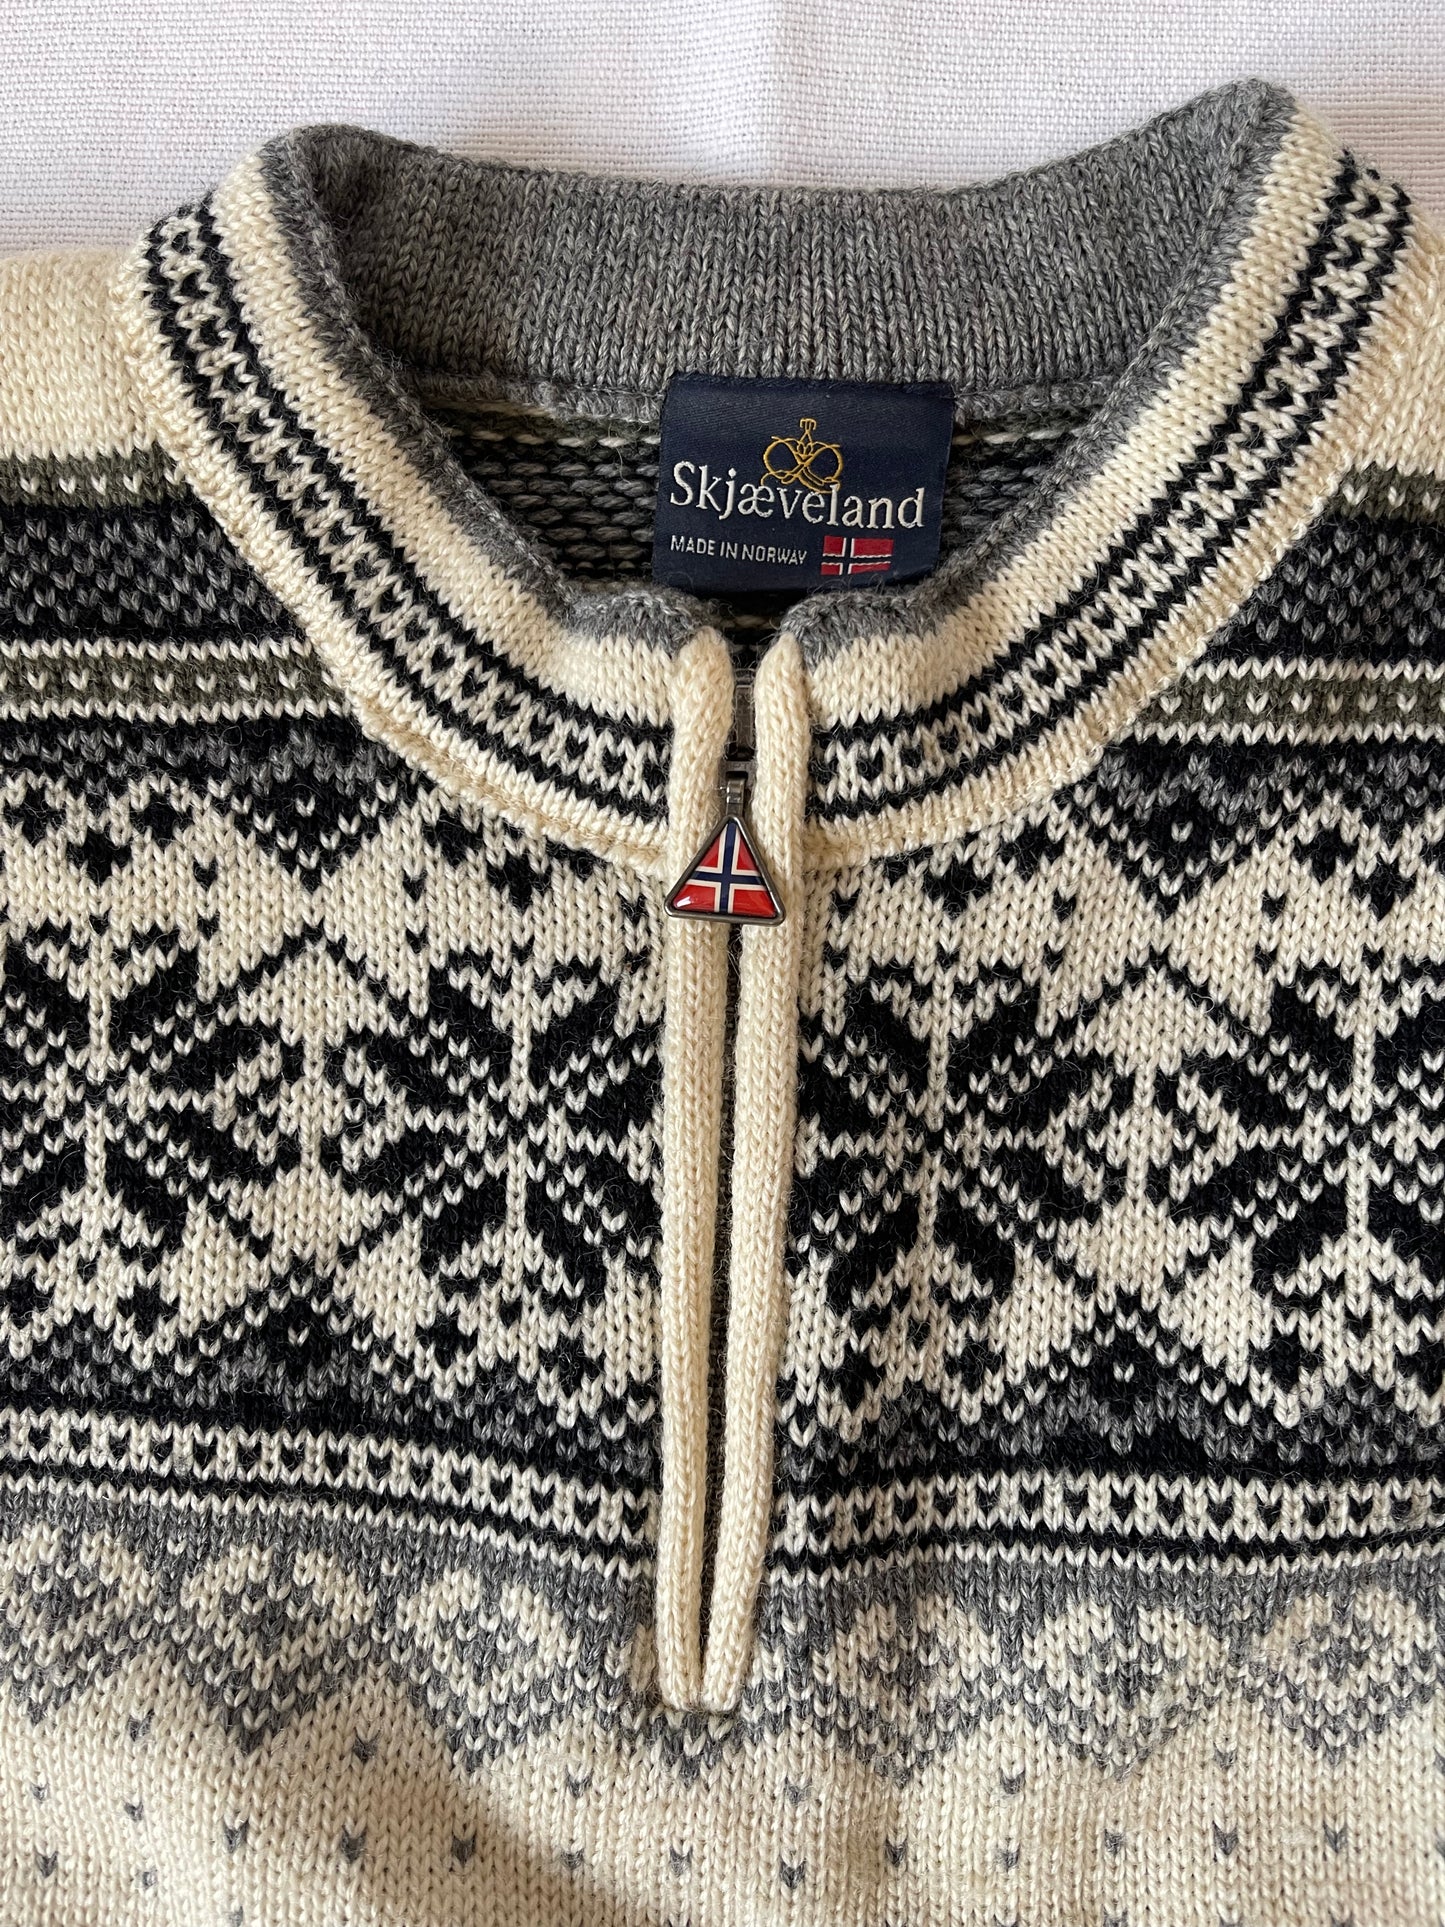 Skjæveland Jumper Made in Norway Pure New Wool Snowflake Size XS-S Off White